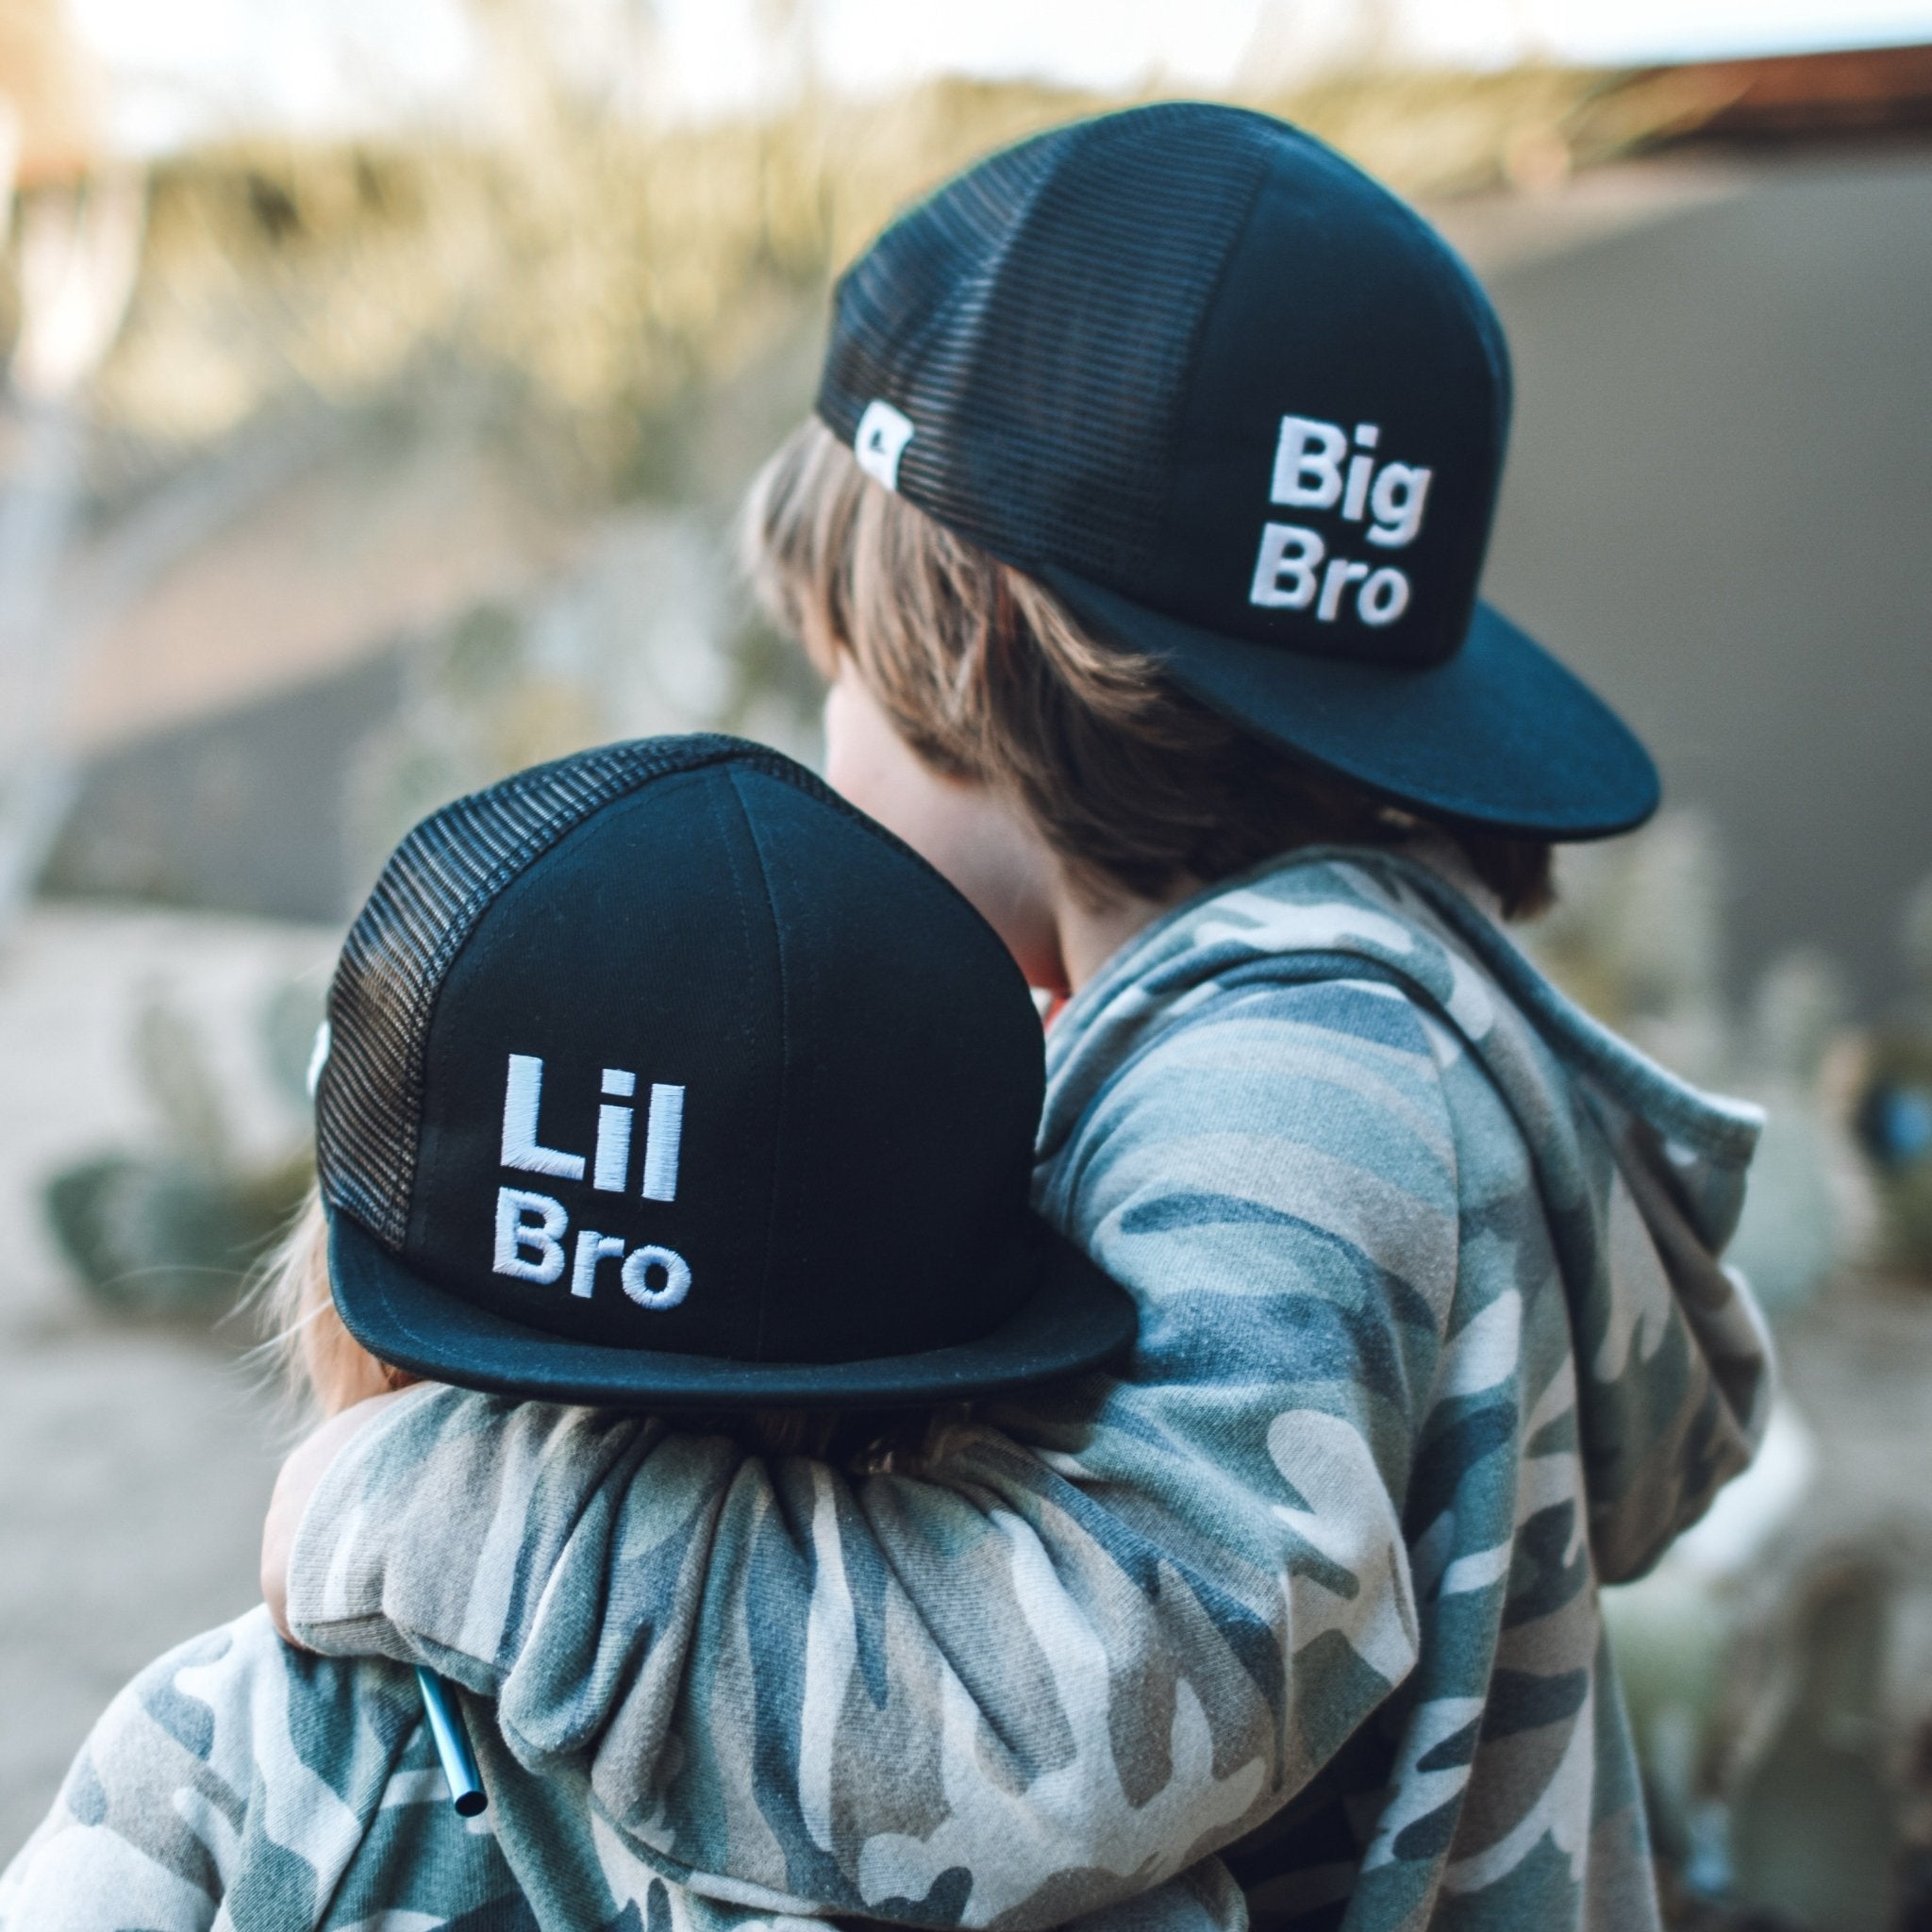 Image of two boys one wearing lil bro trucker hat and the other wearing big bro trucker hat